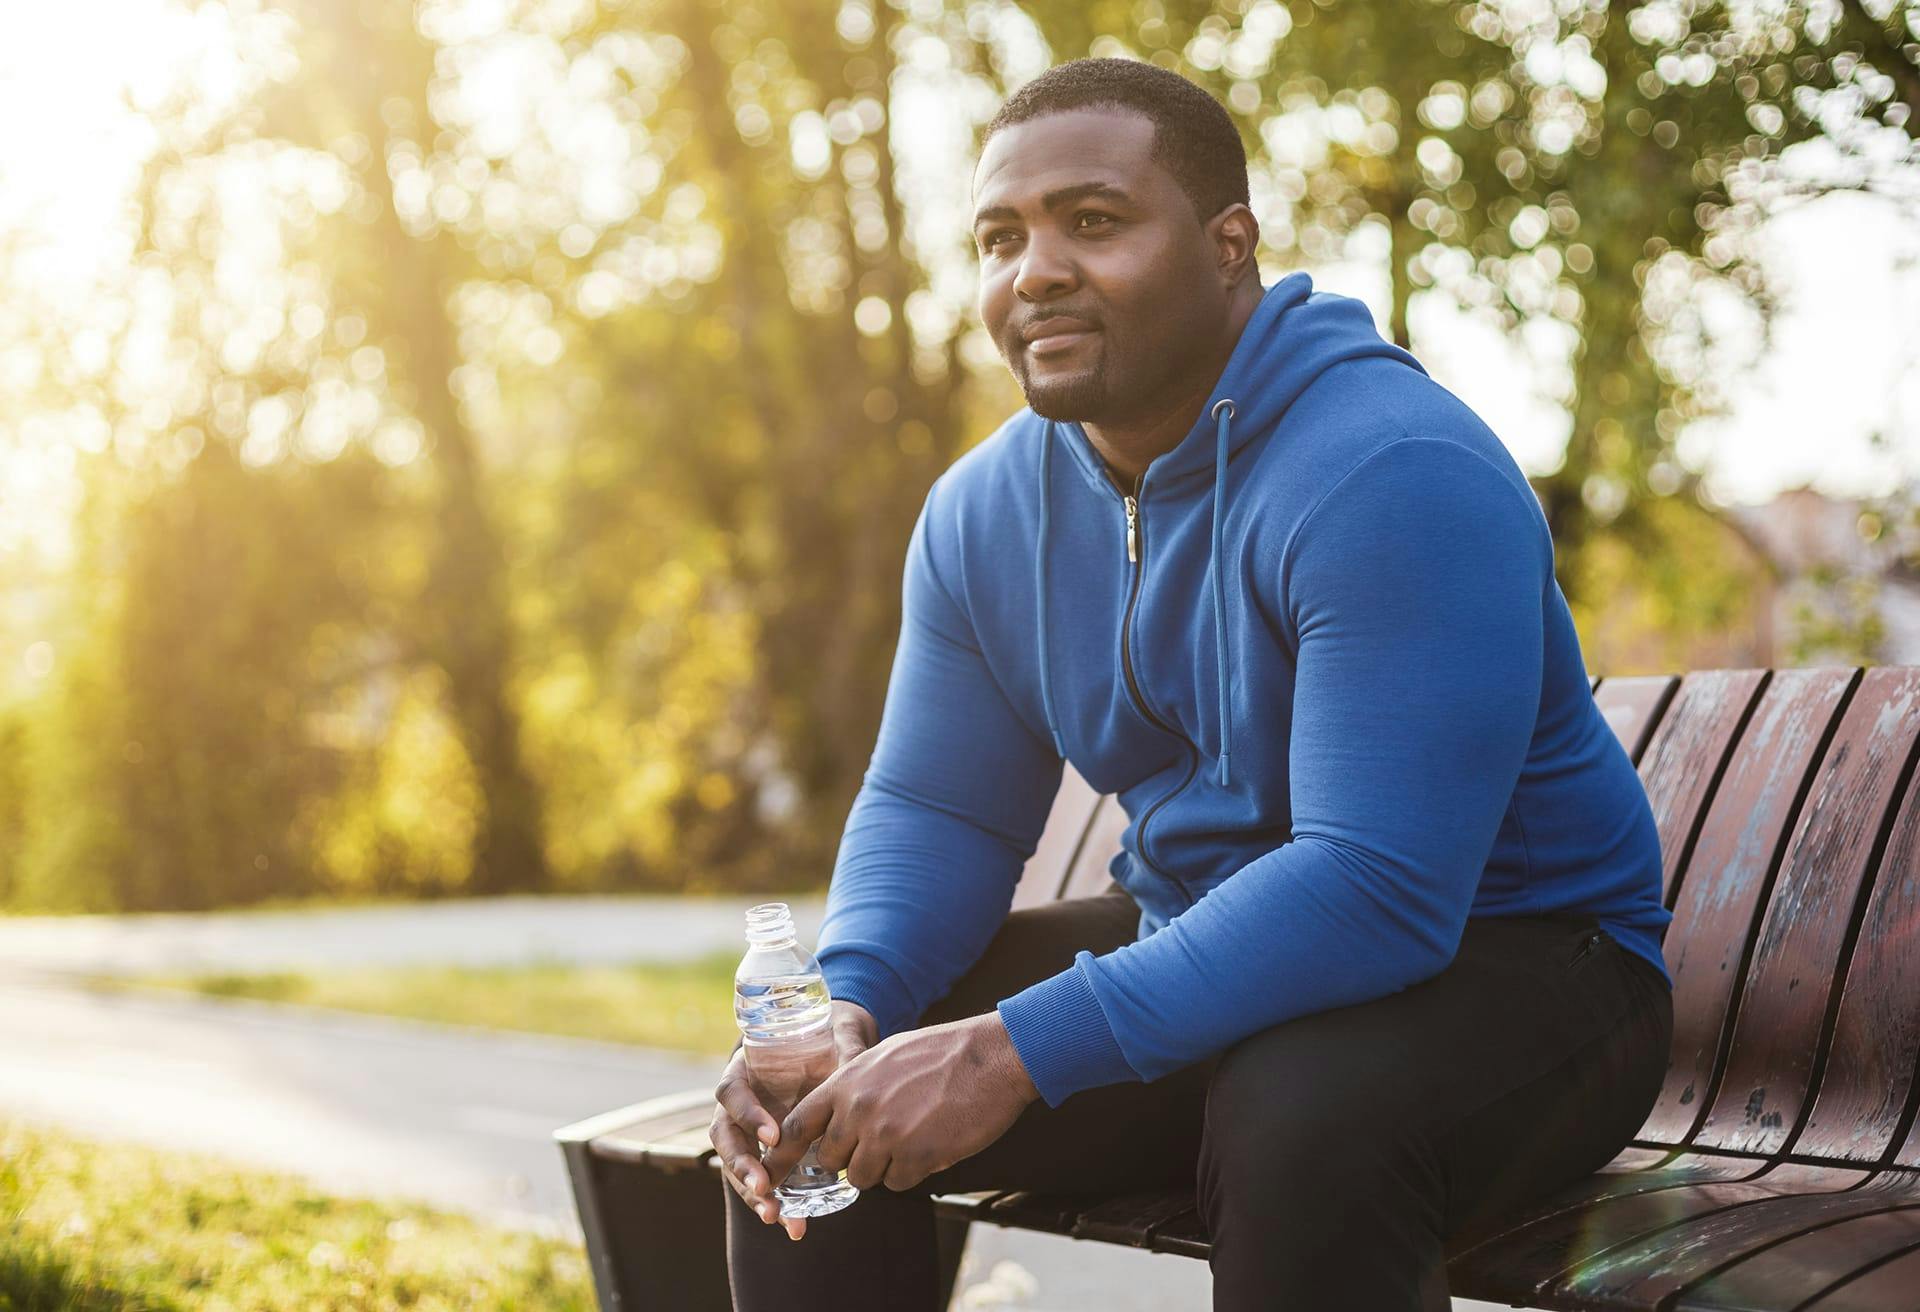 Man in a blue sweater sitting on a bench